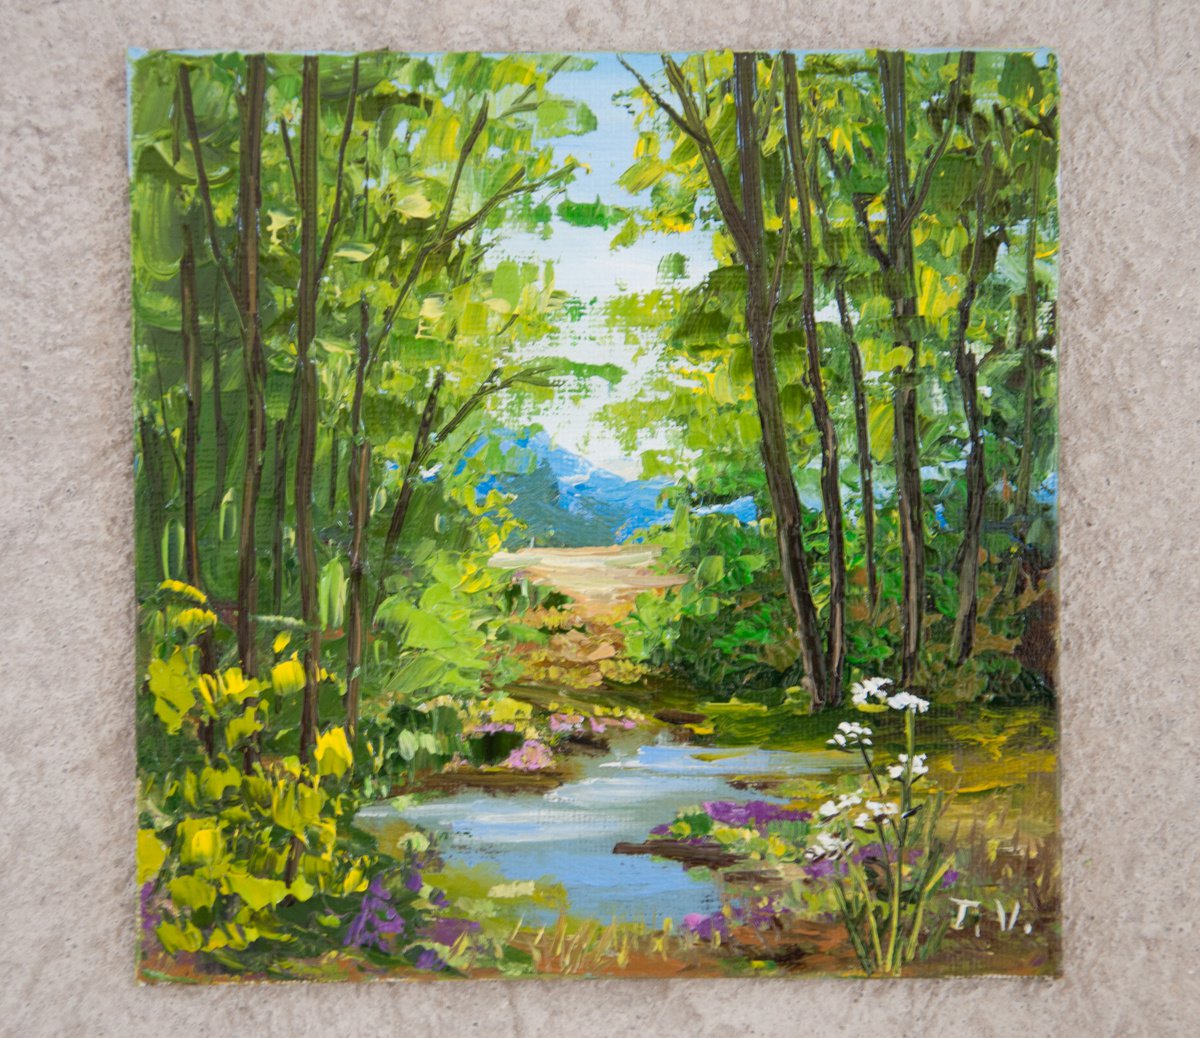 Stream in forest. Oil painting. Miniature. 6 x 6in. by Tetiana Vysochynska